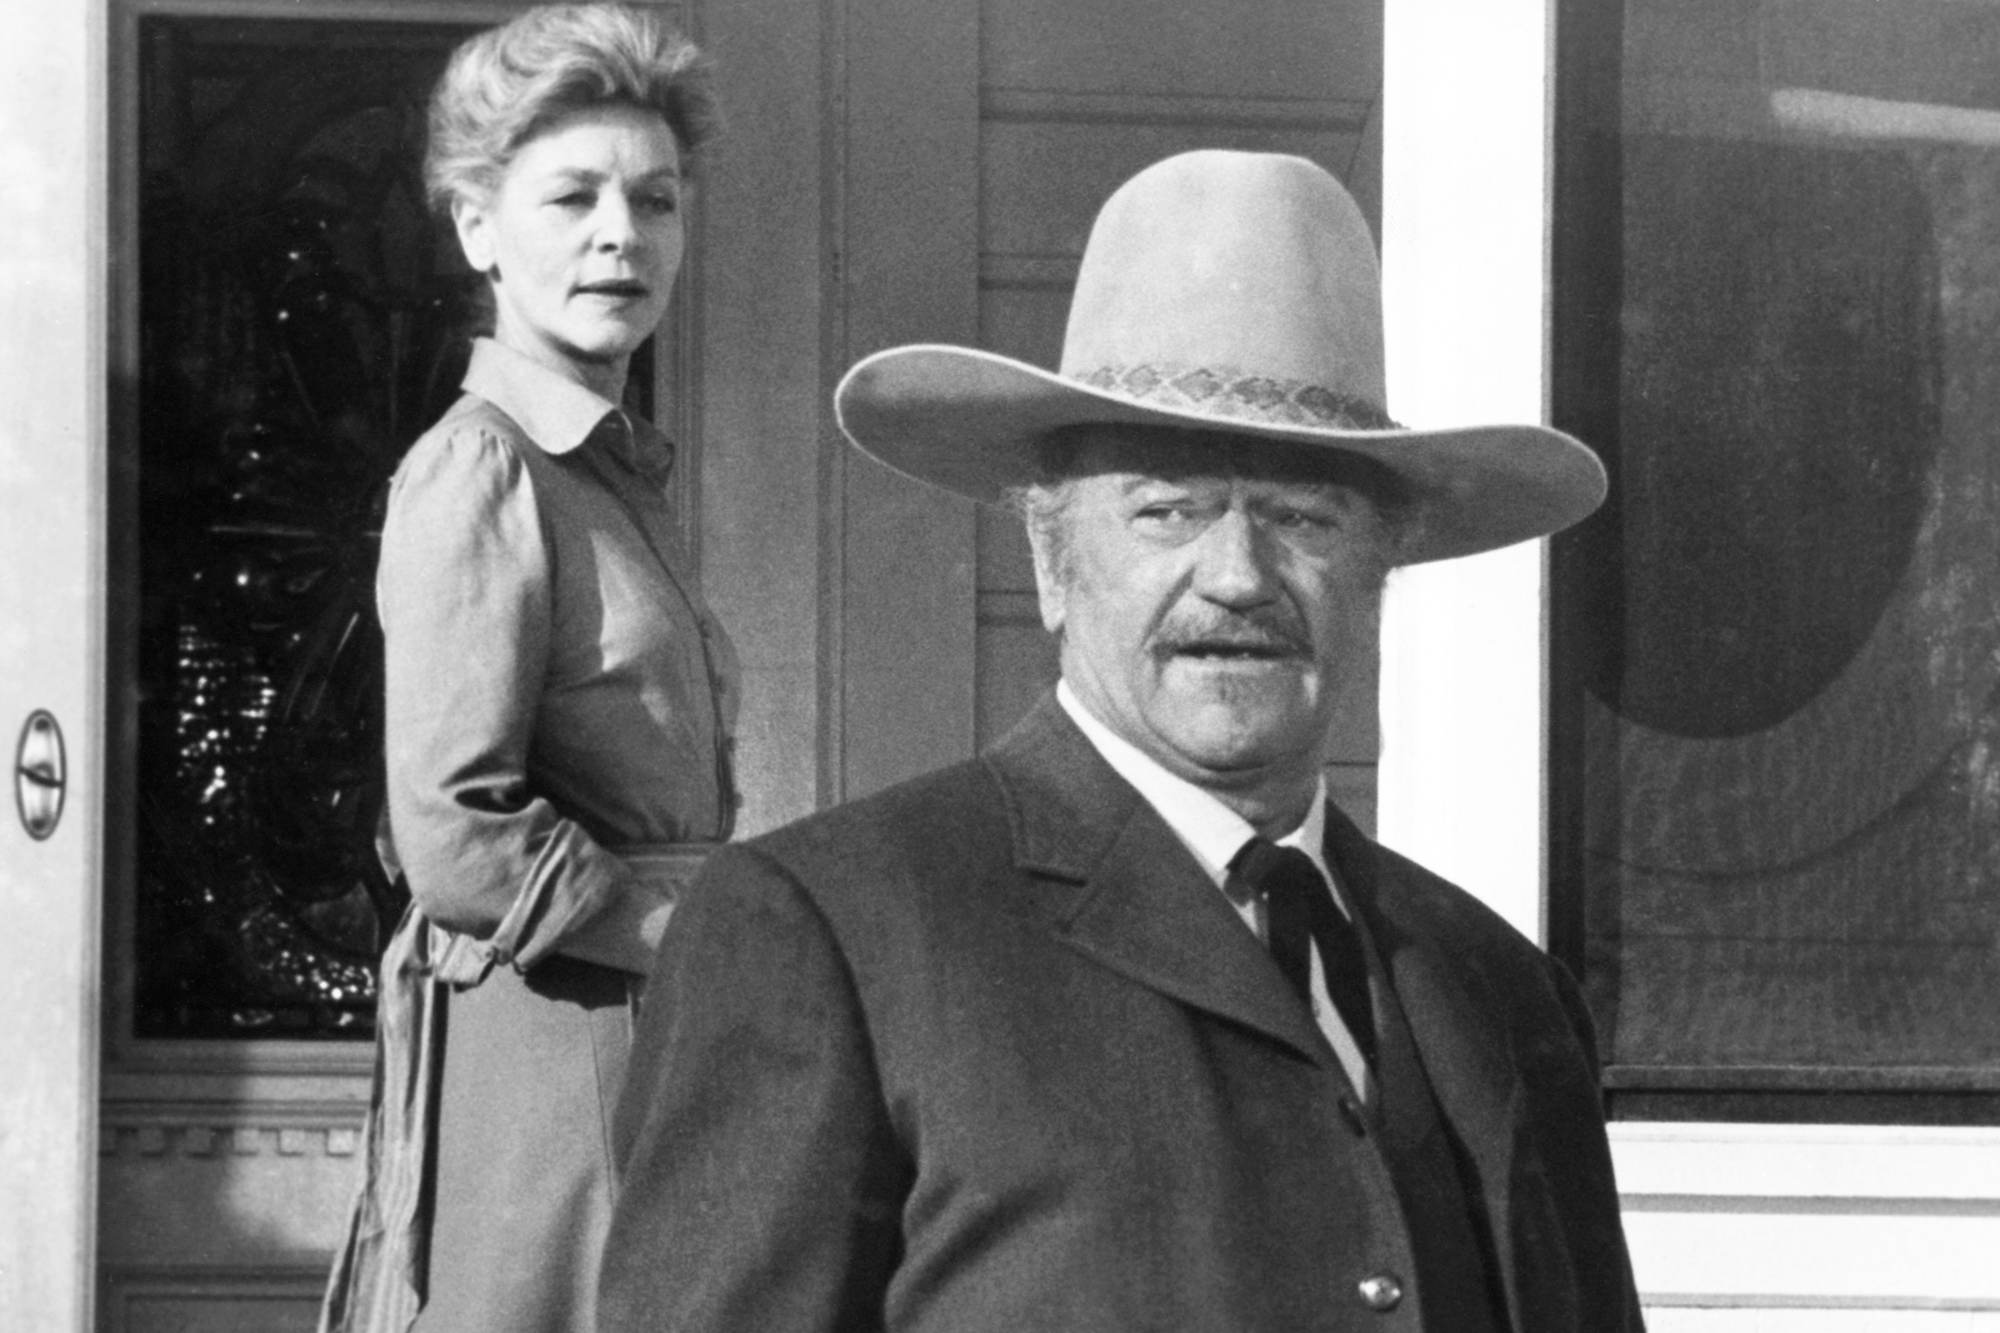 'The Shootist' Lauren Bacall as Bond Rogers and John Wayne as J.B. Books. Rogers is standing behind Books on the porch of the house.